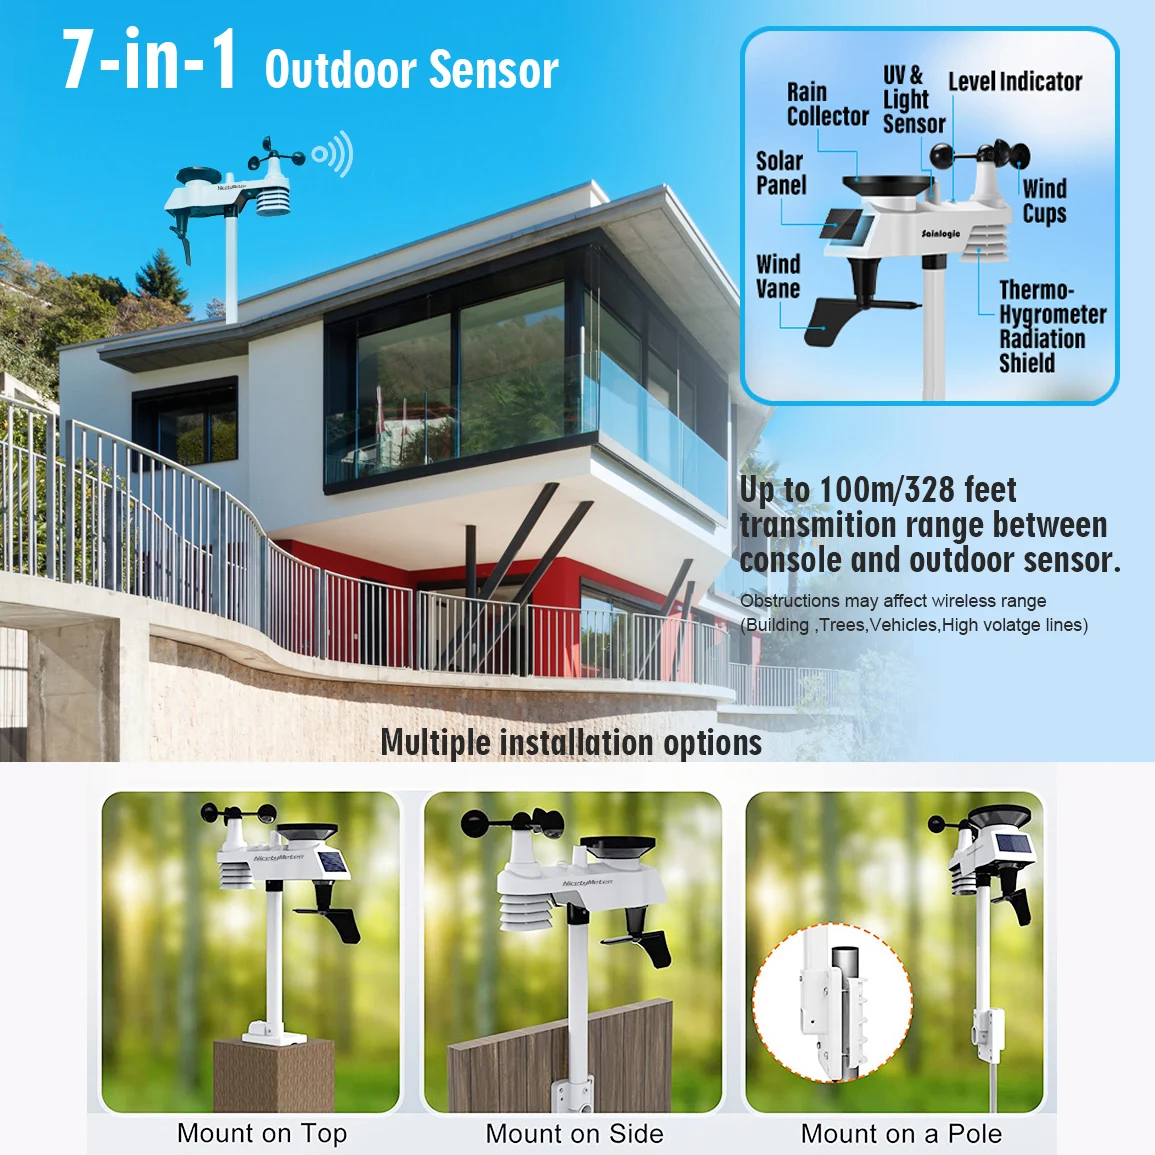 Sca4900bf65334921b324767948ed9718t 0320 Wireless Weather Stations 10 Inch Large Display Indoor Outdoor Temperature Humidity Rain Gauge Wind Speed 8 Channel Support